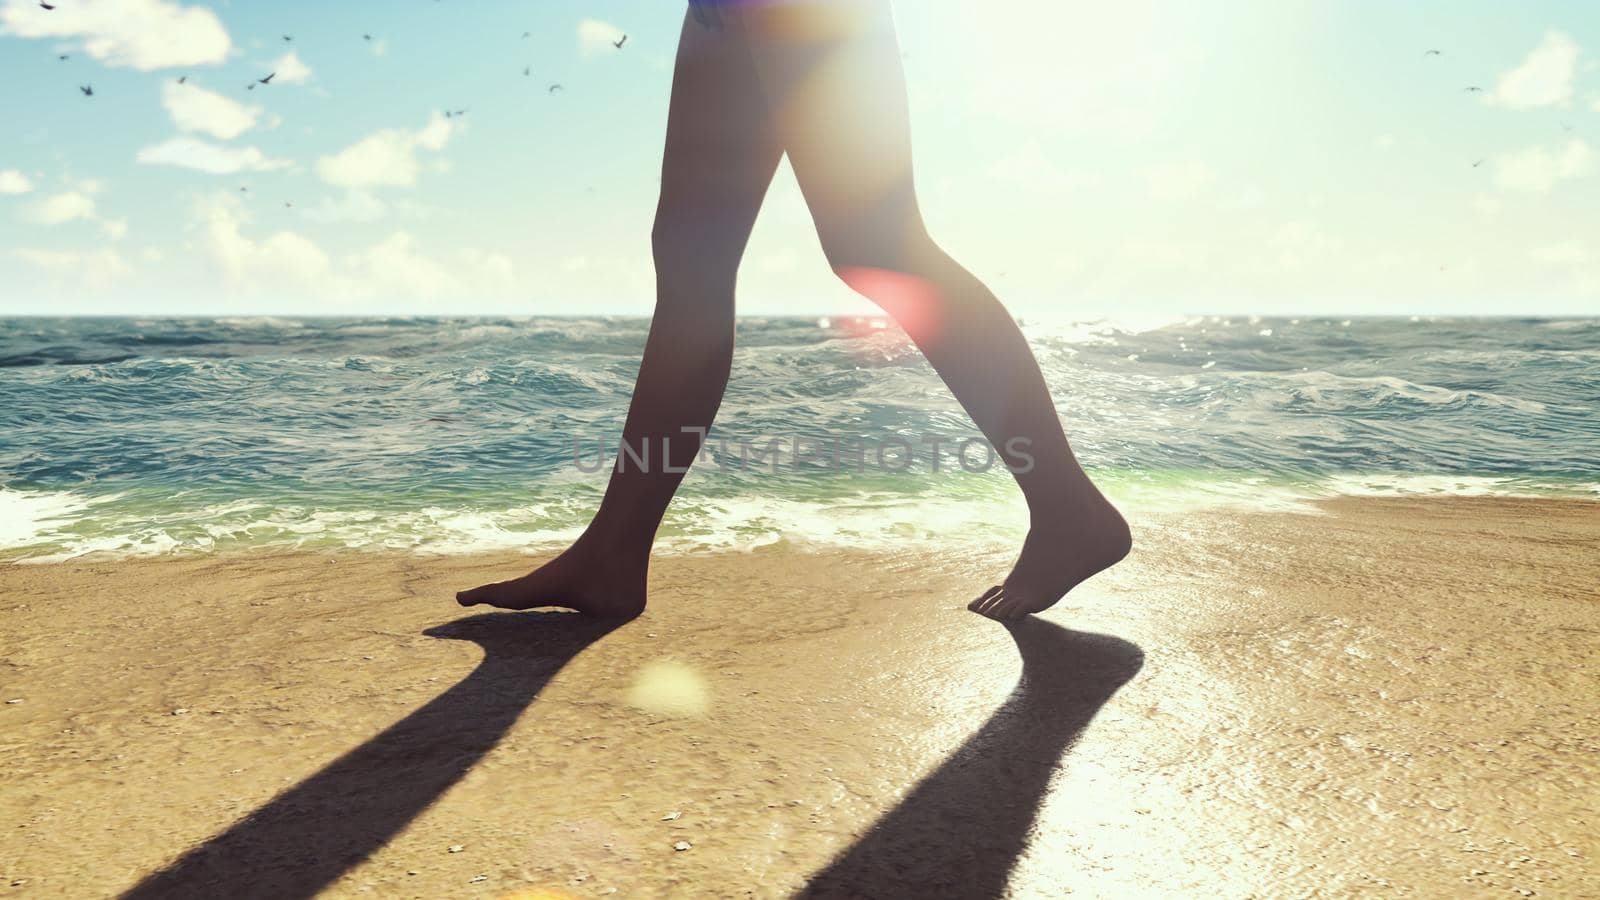 Beautiful scene of a woman walking on a beach on a tropical island. 3D Rendering by designprojects